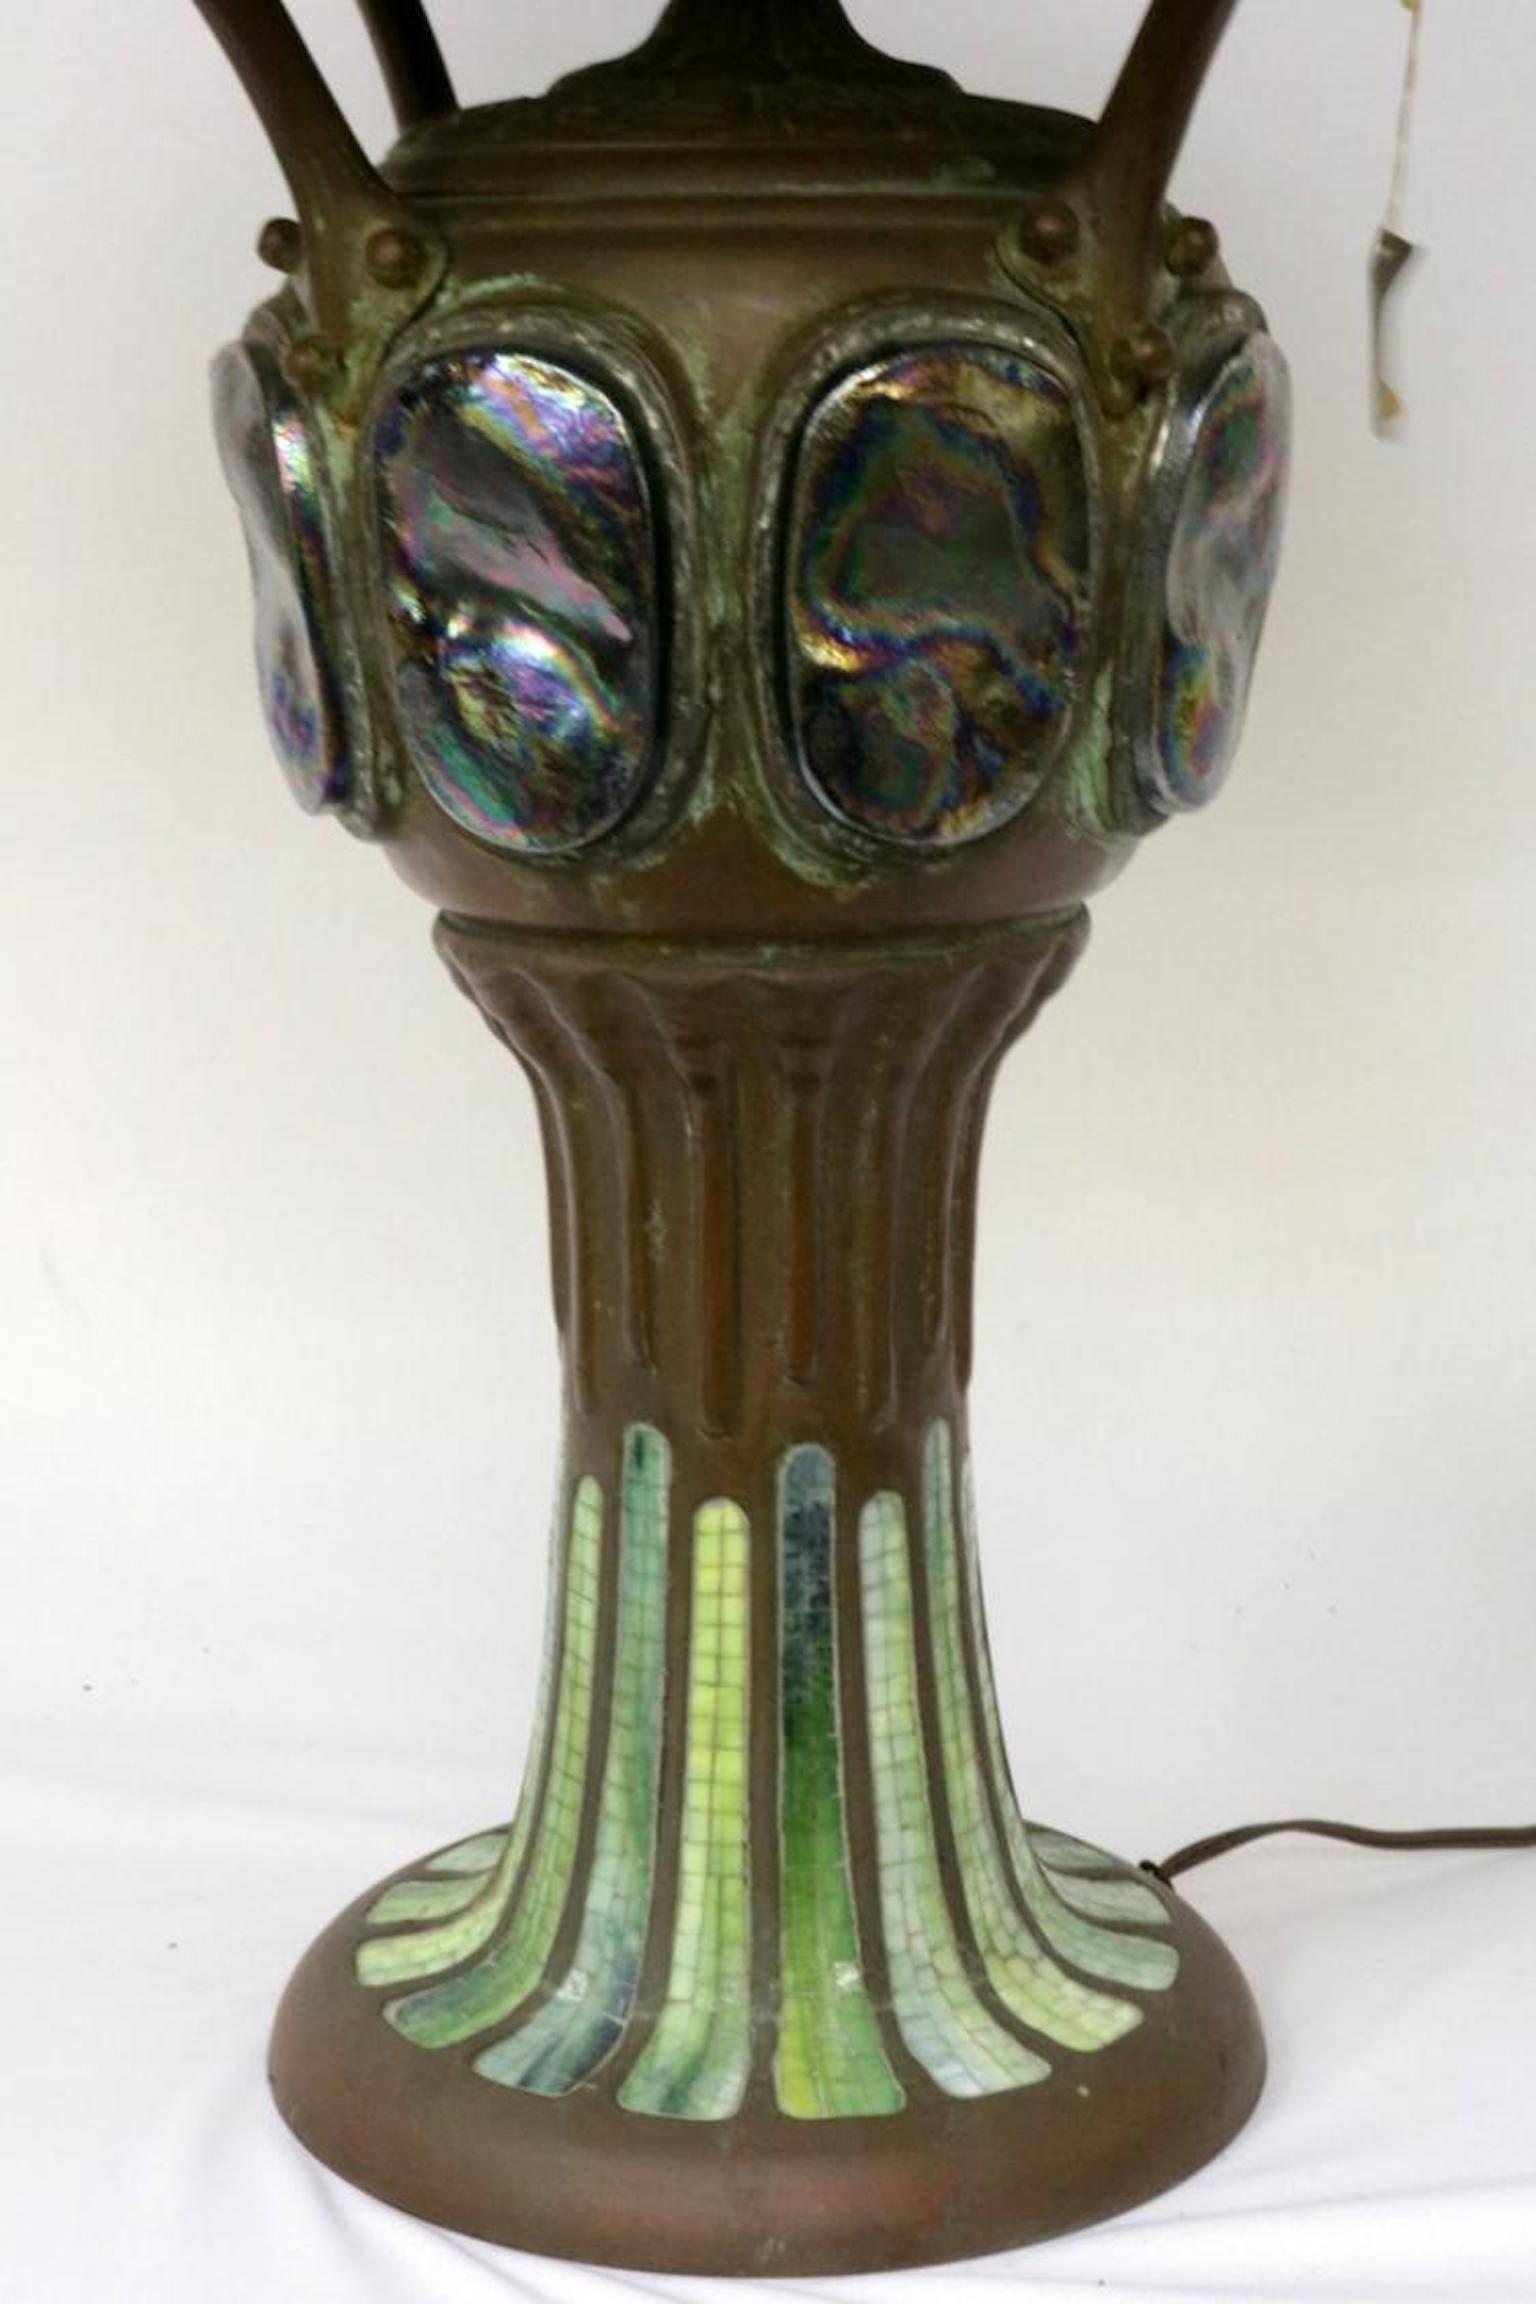 Vintage Tiffany style stained glass and bronze lamp. Dragon fly design. Antique base. Measures: 35 1/2